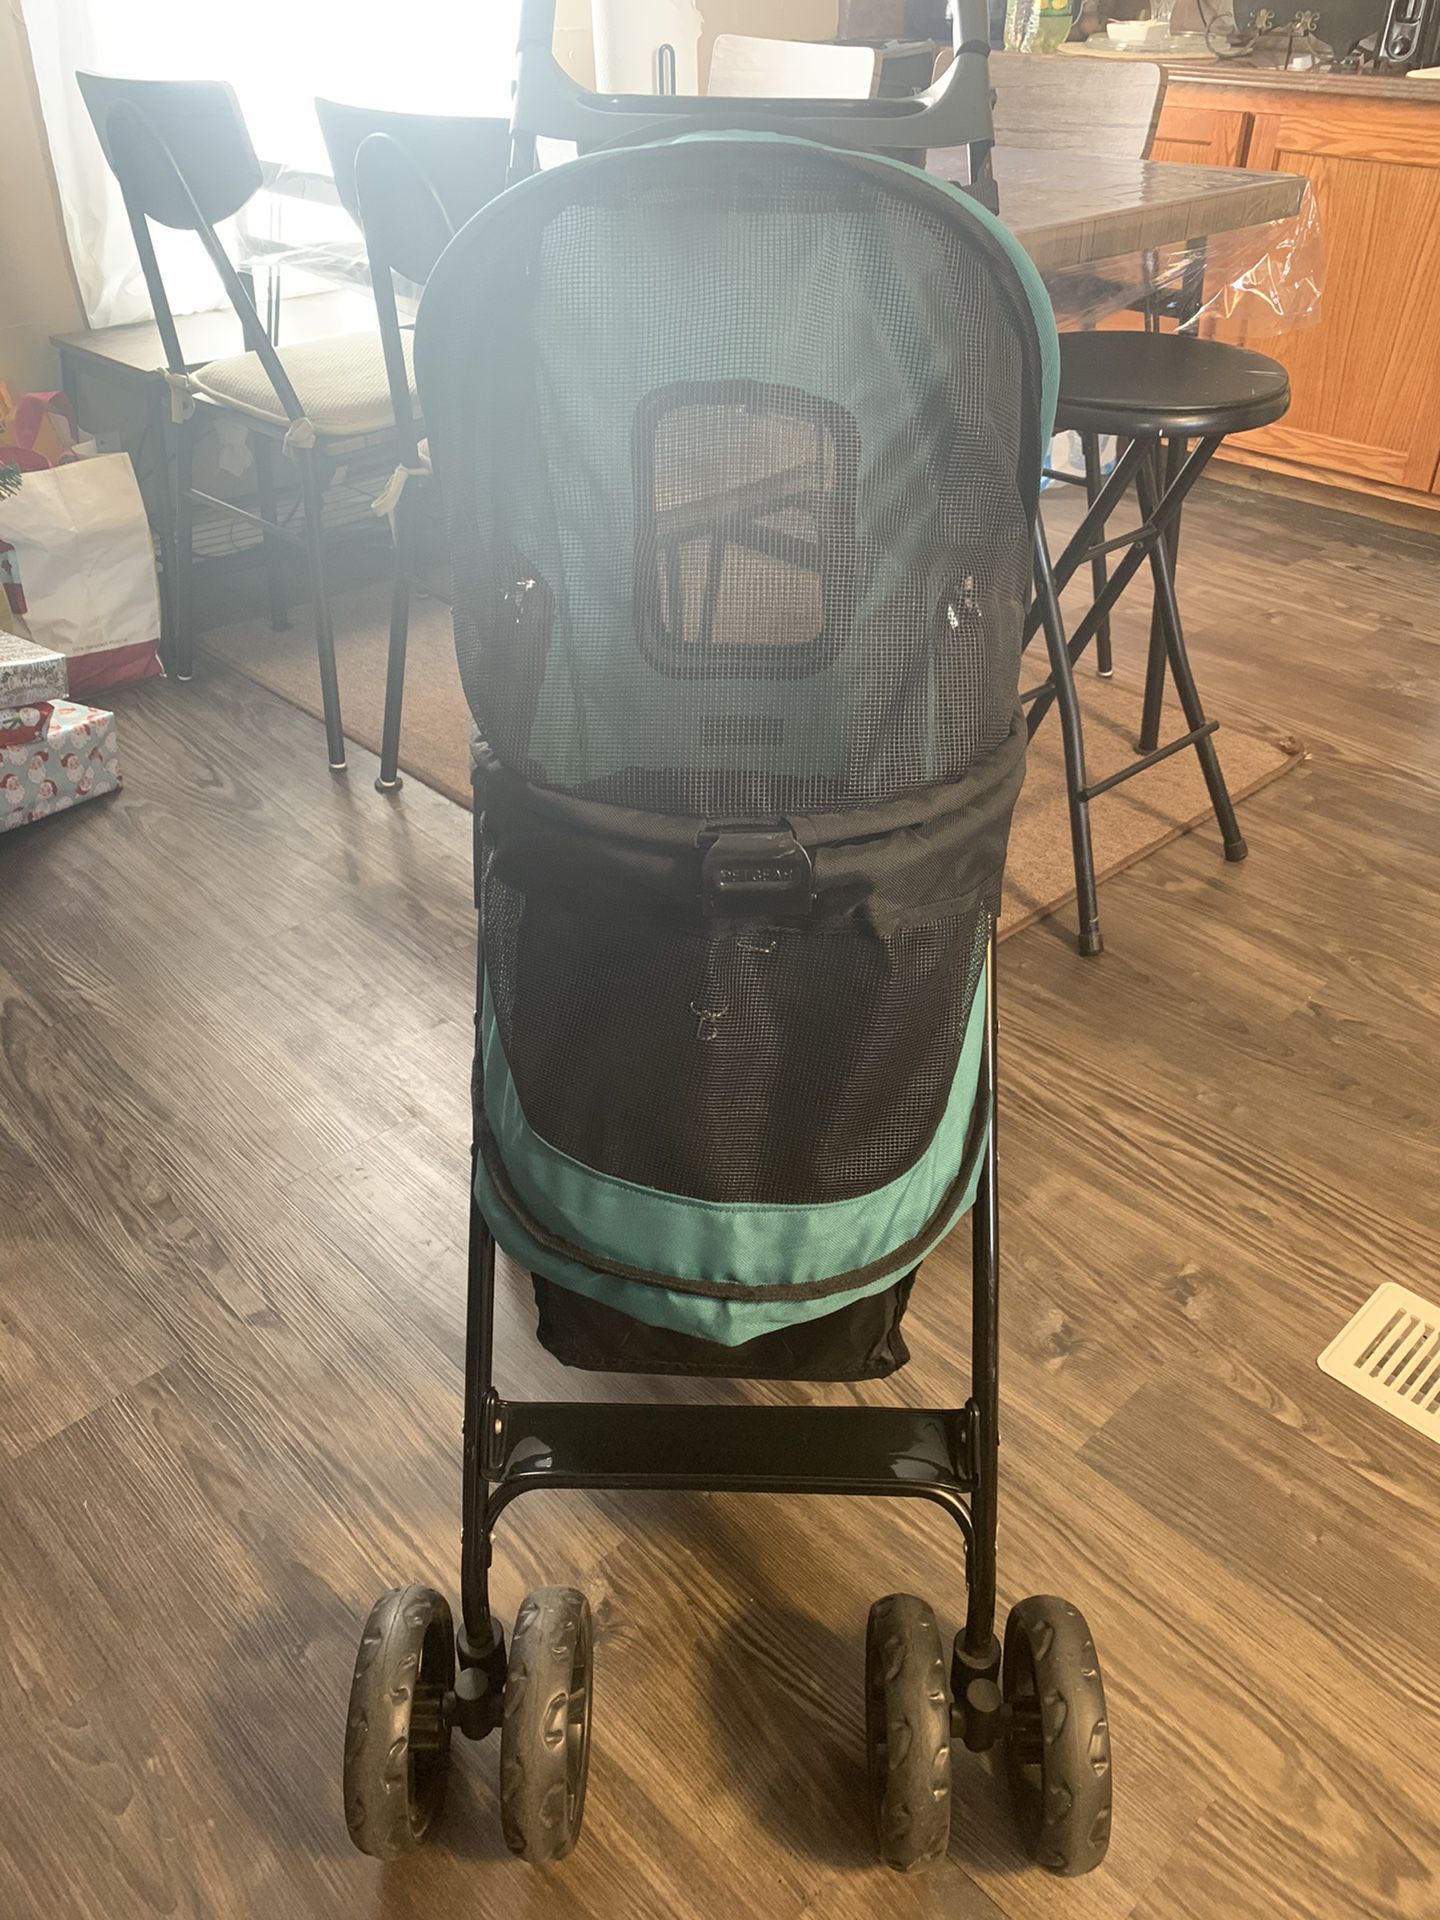 Small Breed Stroller